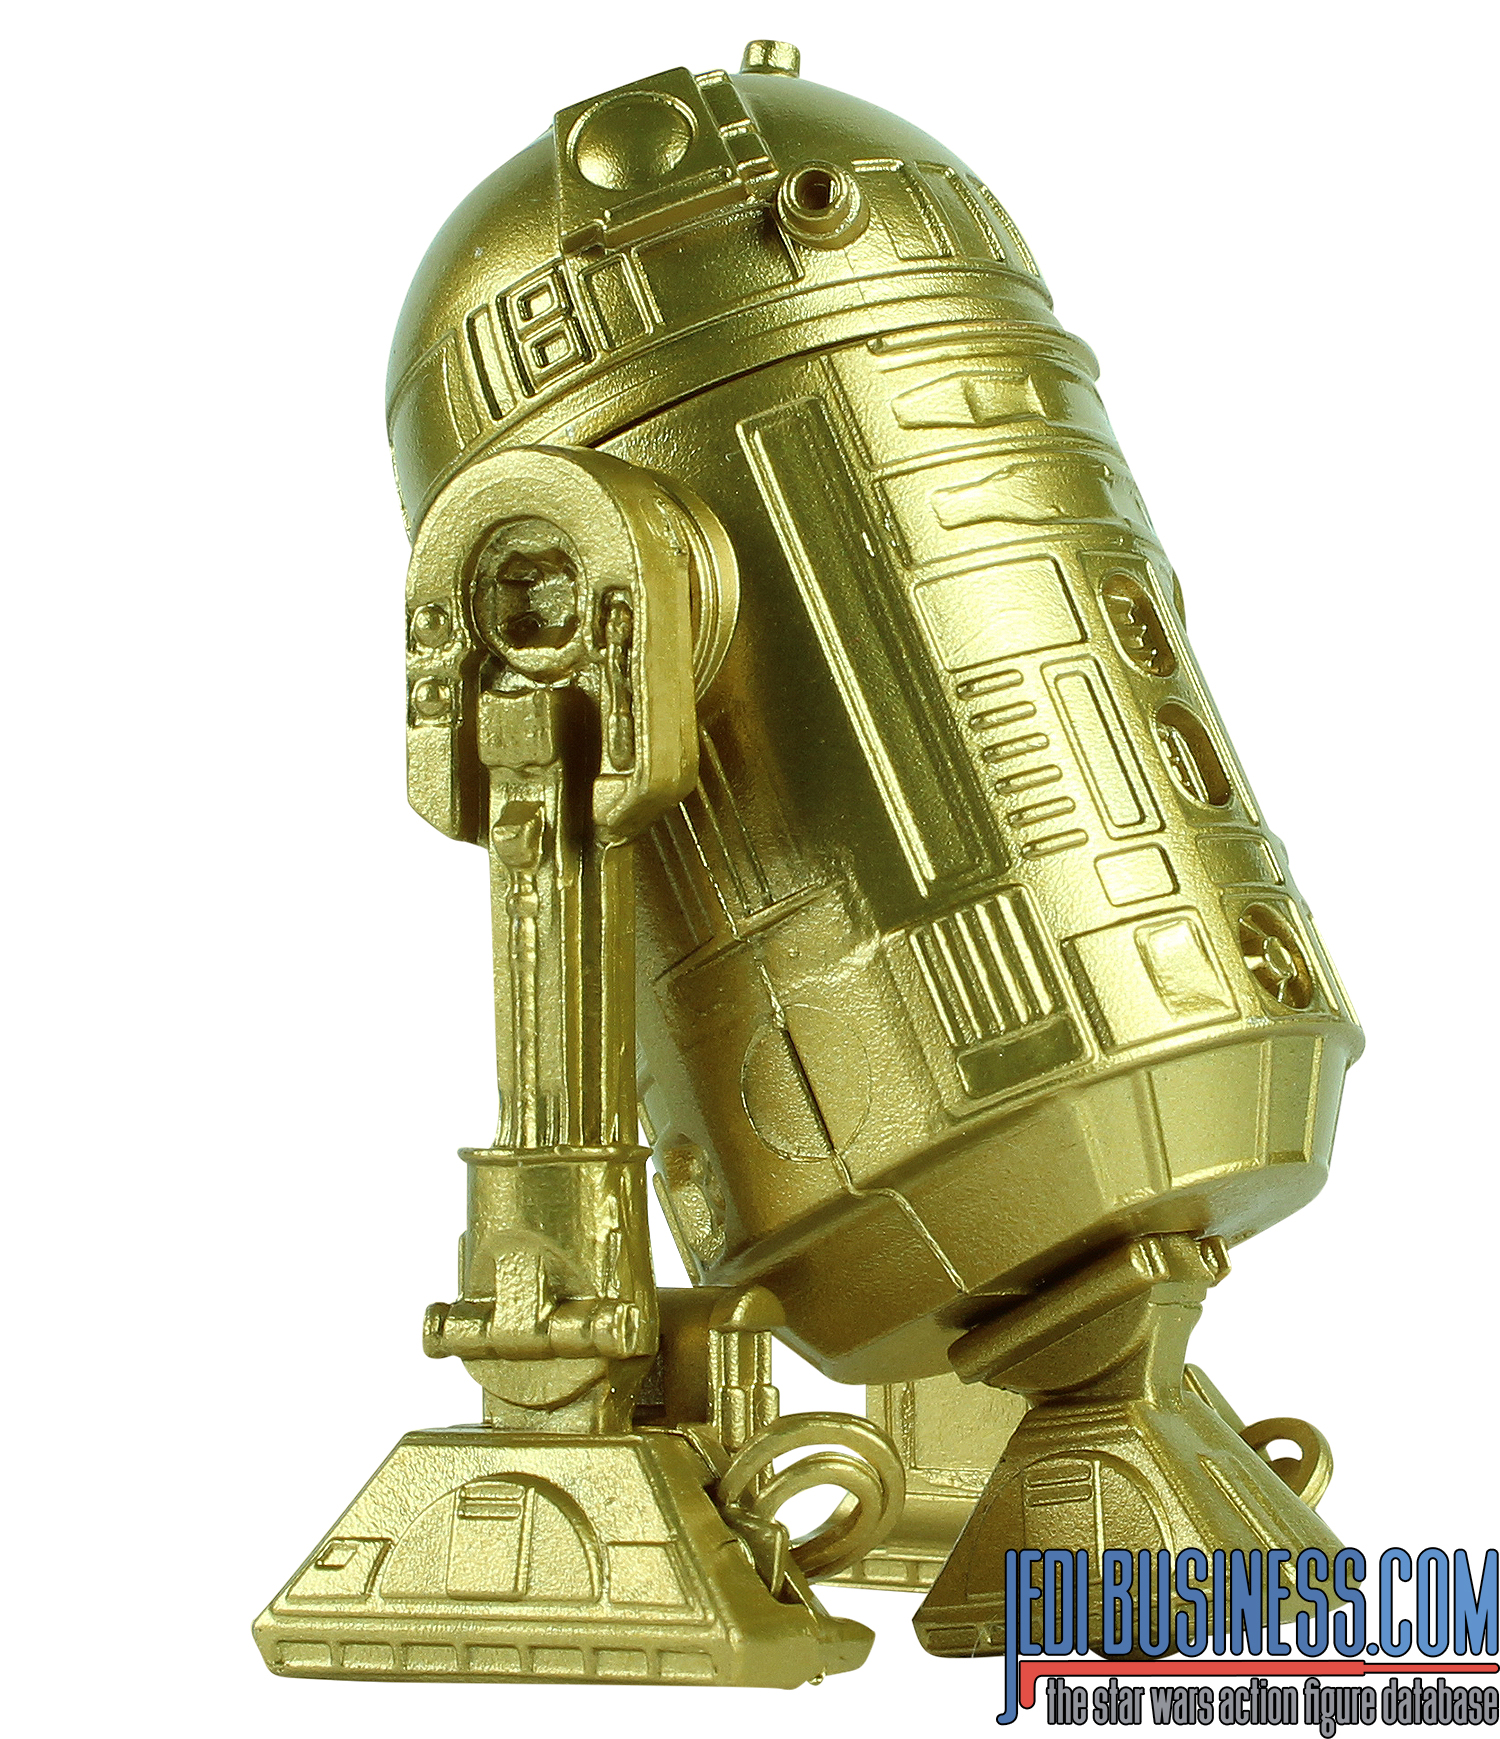 R2-D2 Episode 9 - Bundled With BB-8 And C-3PO